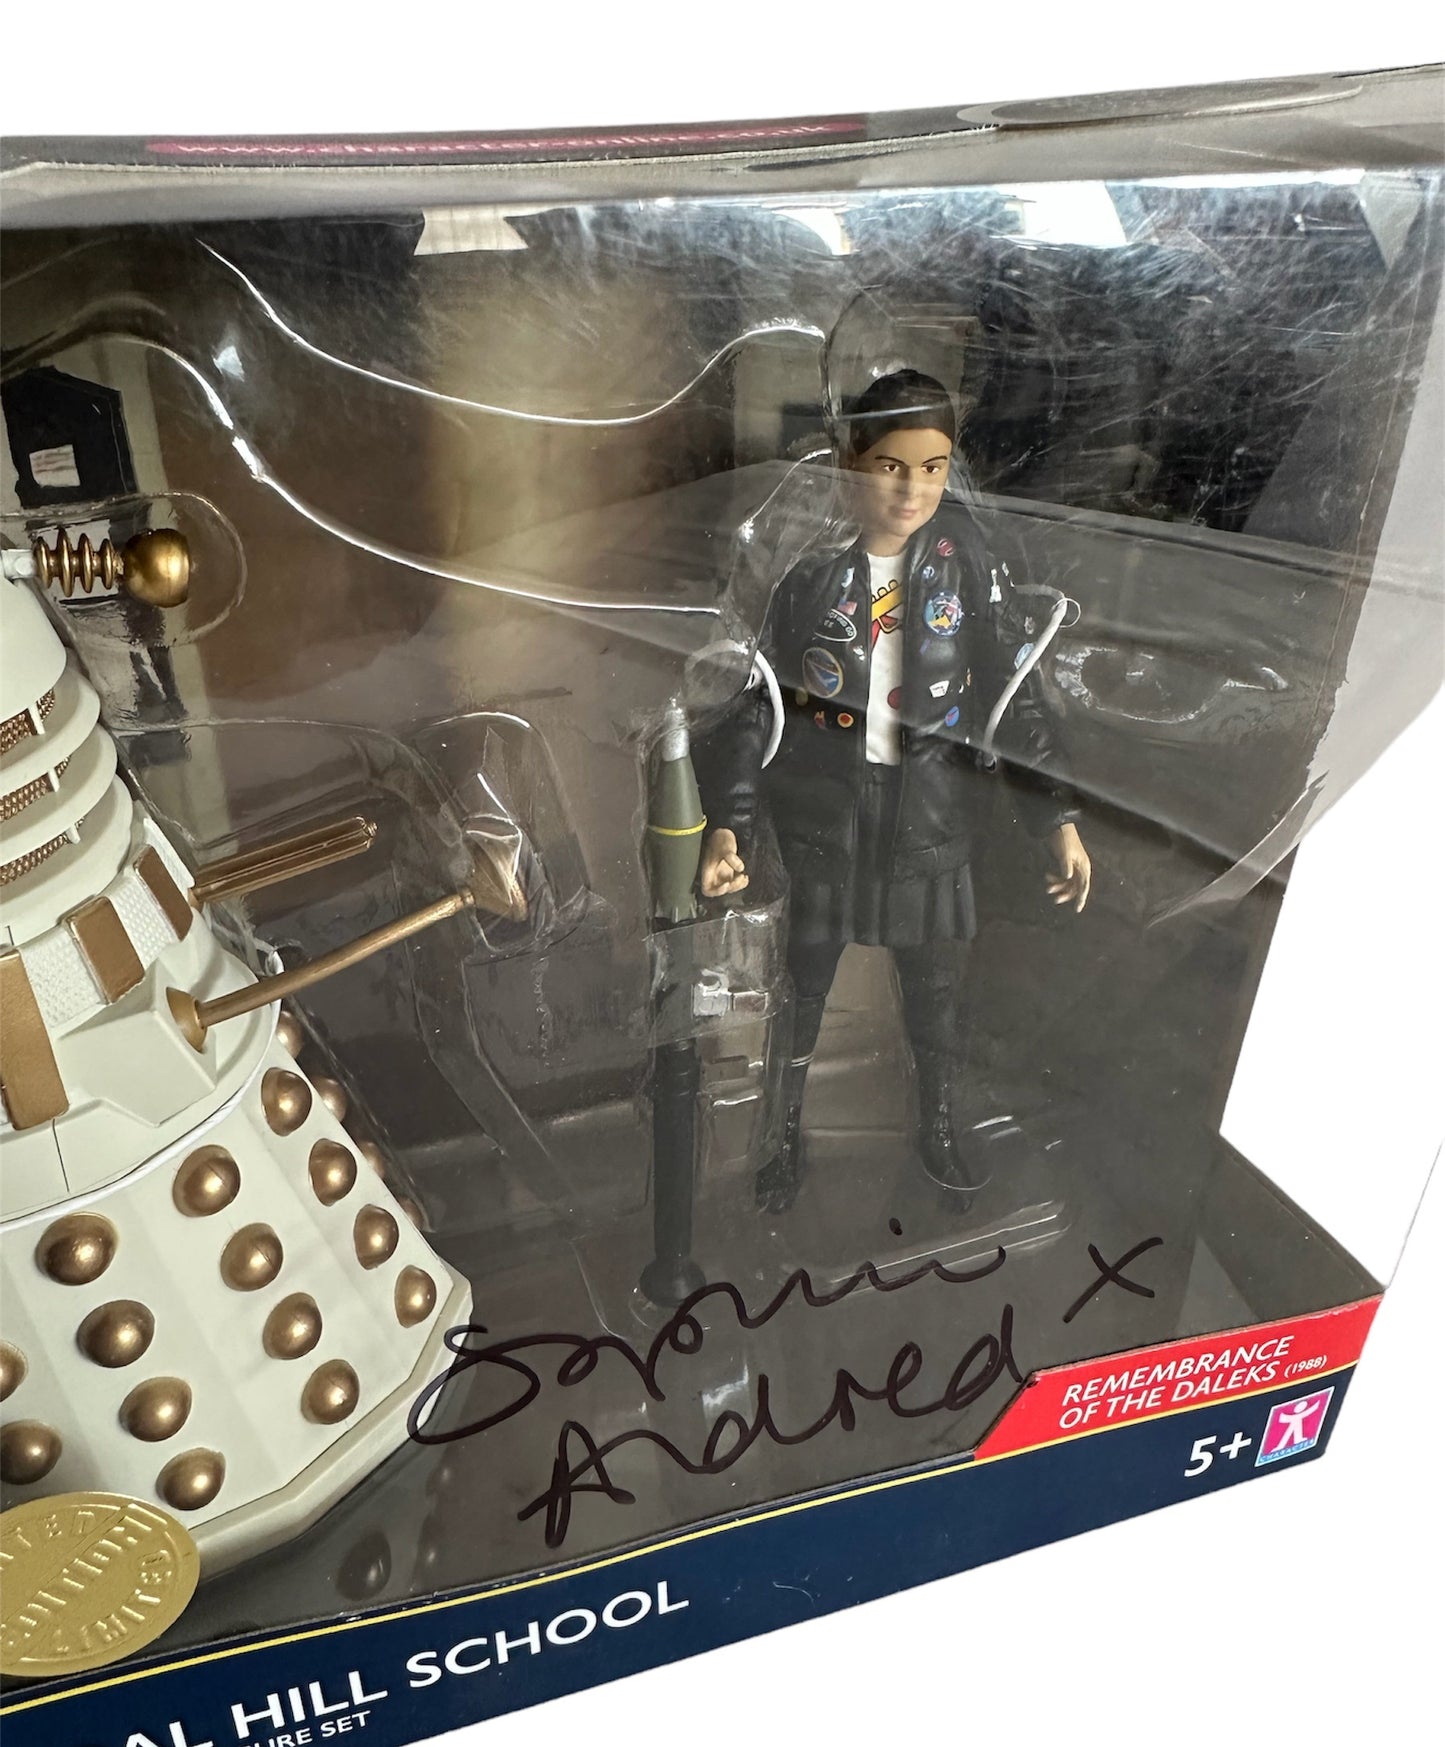 Vintage 2018 Dr Who Remembrance Of The Daleks Limited Edition Collector Action Figure Set - Autographed By Sophie Aldred - Includes Ace And The Imperial Dalek - Factory Sealed